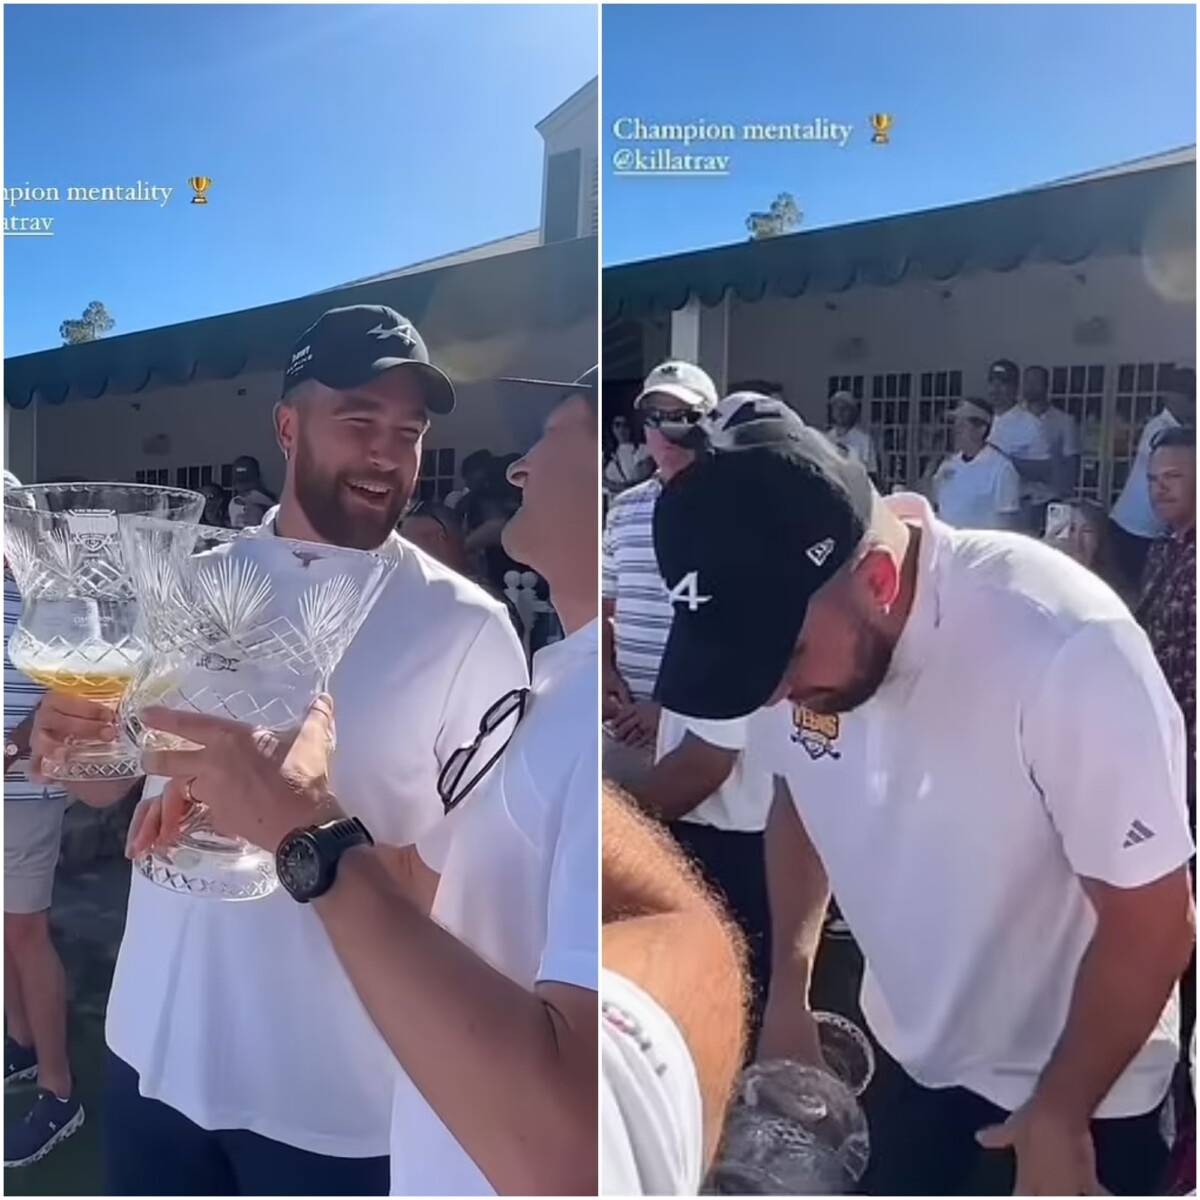 Video Travis Kelce drinks beer from a golf trophy at Patrick Mahomes’ charity event.